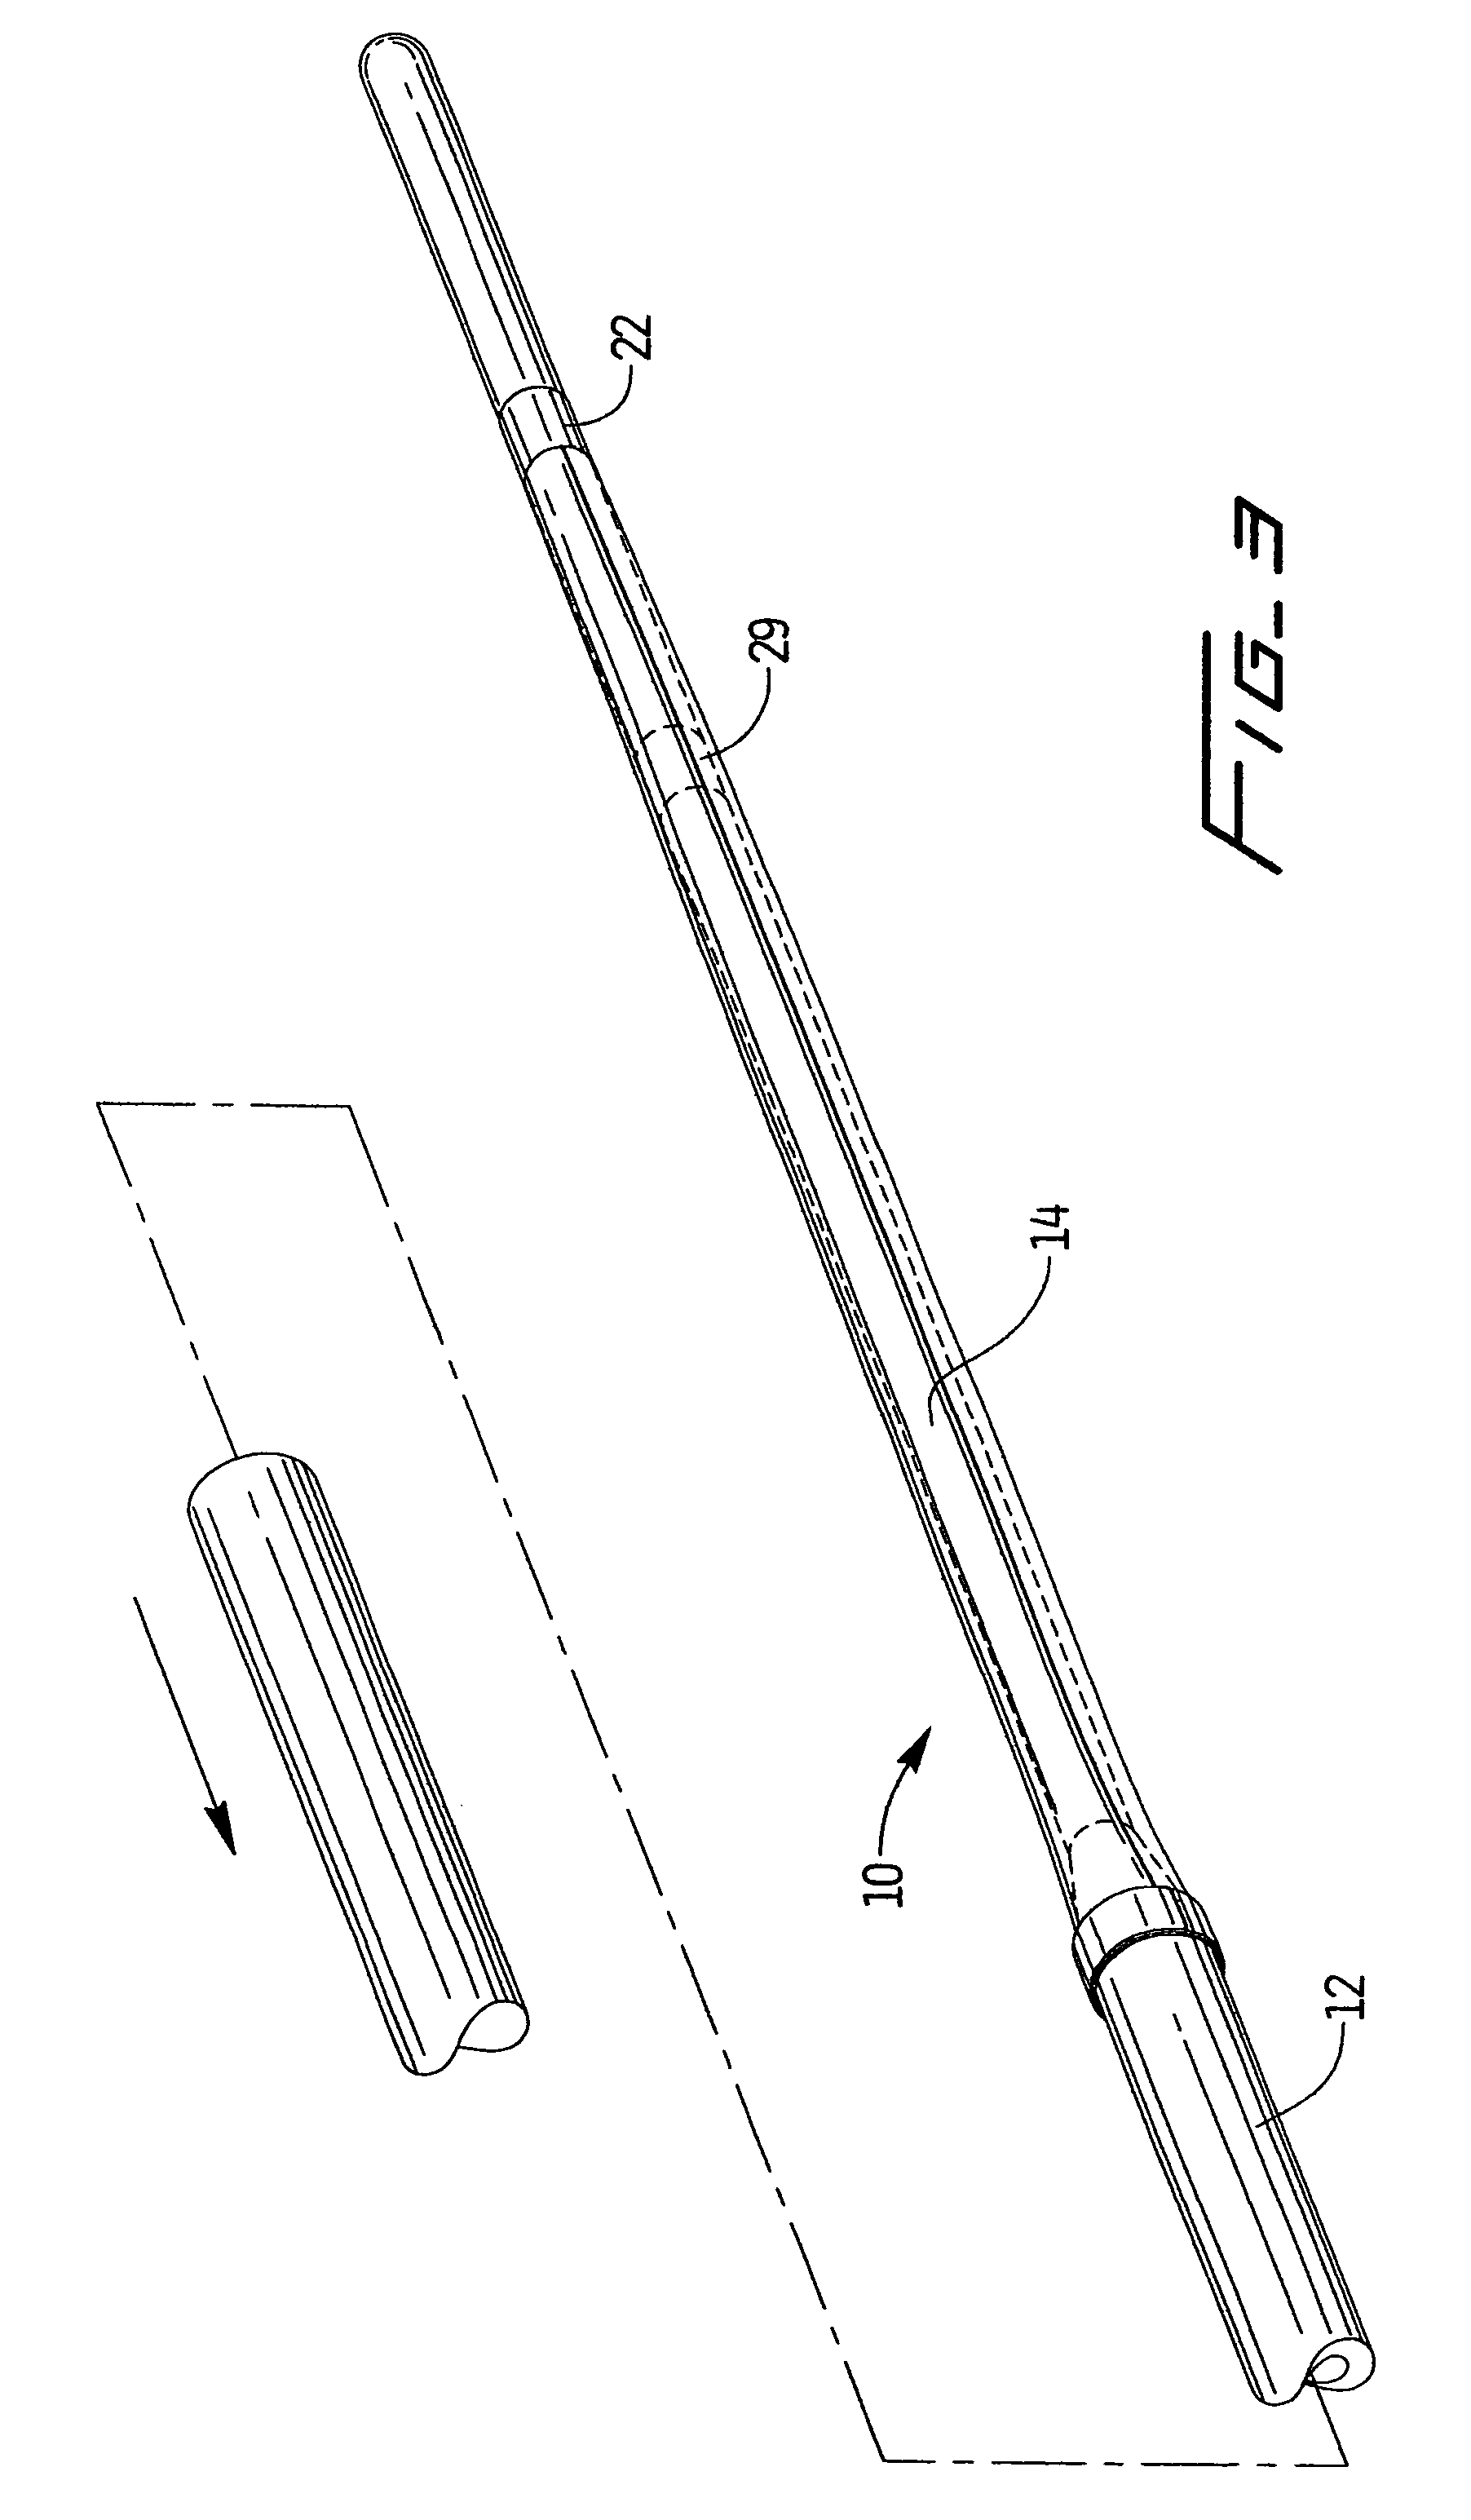 Distal protection device